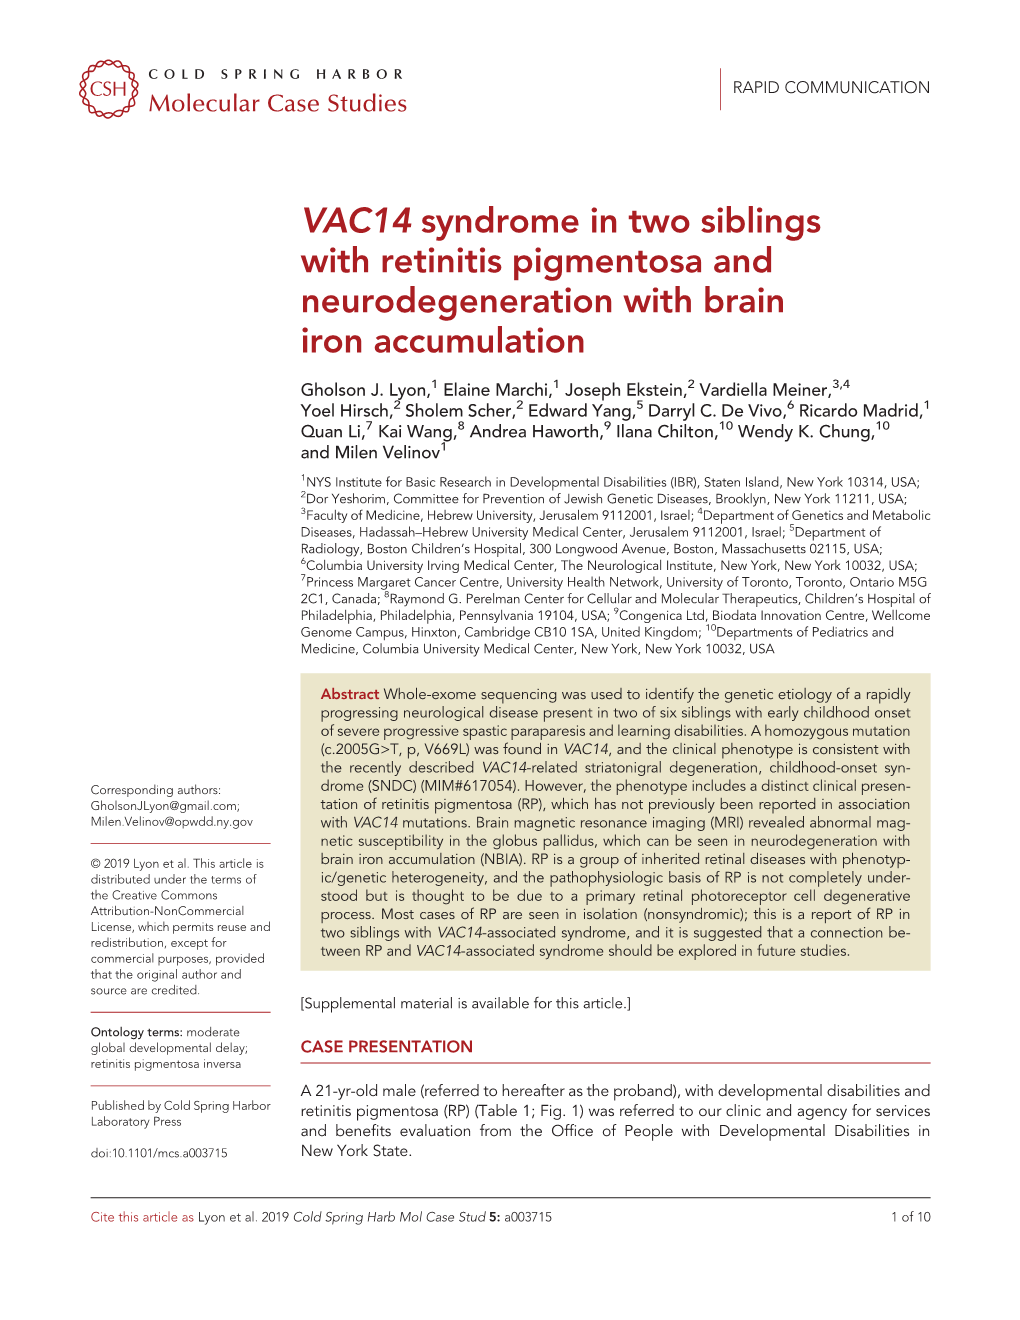 VAC14 Syndrome in Two Siblings with Retinitis Pigmentosa and Neurodegeneration with Brain Iron Accumulation